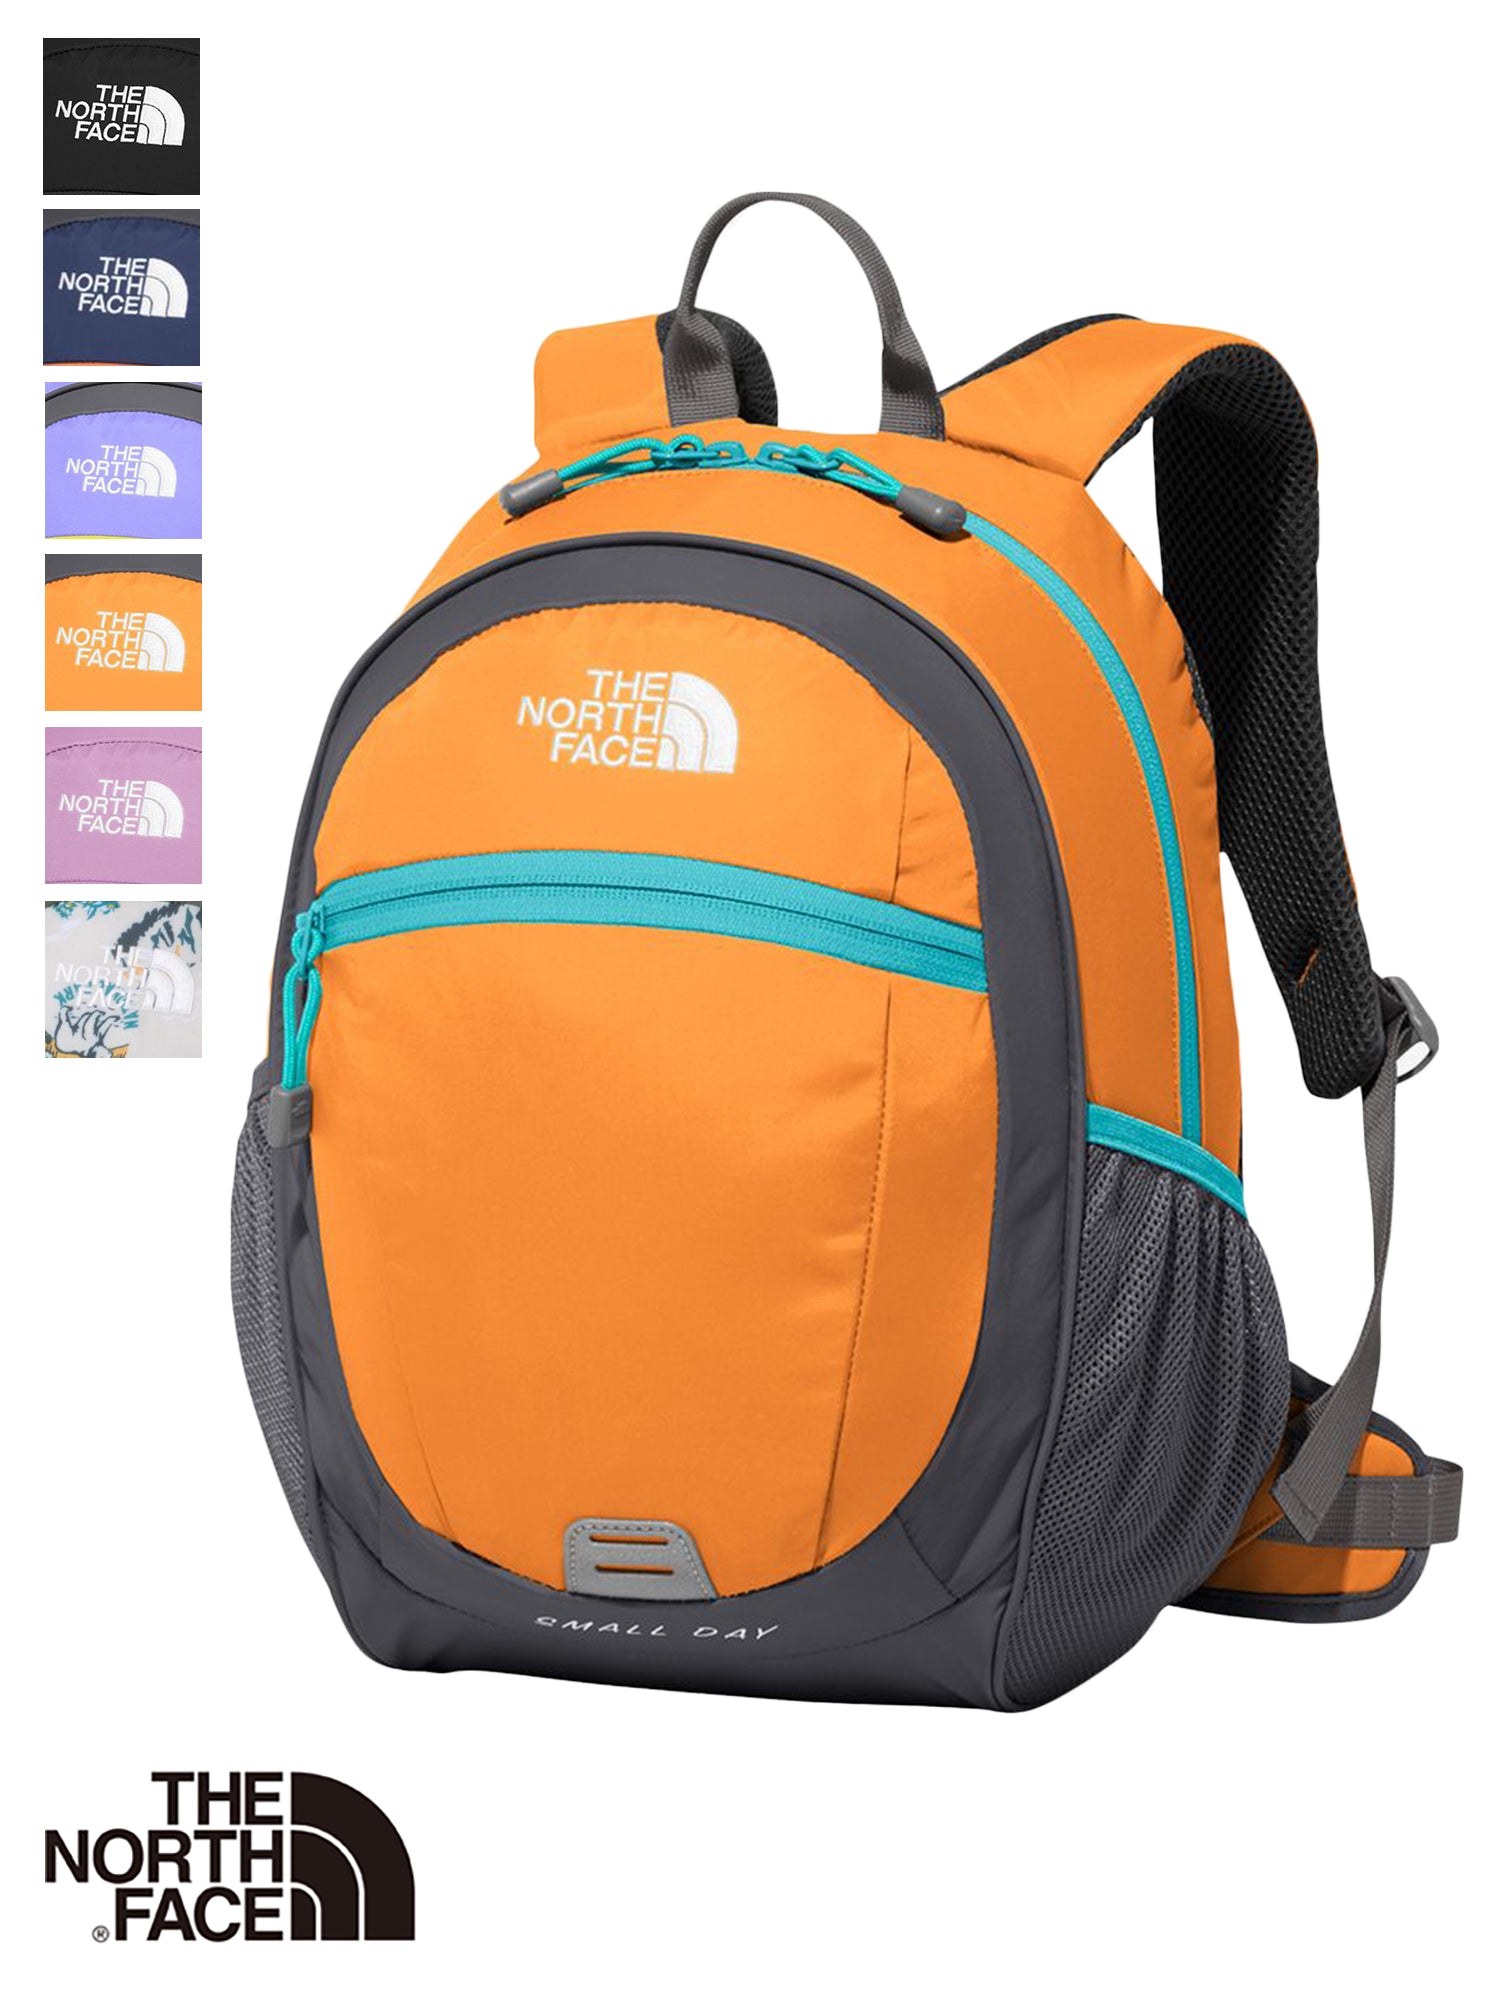 [Sold Out No Restock][THE NORTH FACE] Kids Small Day 